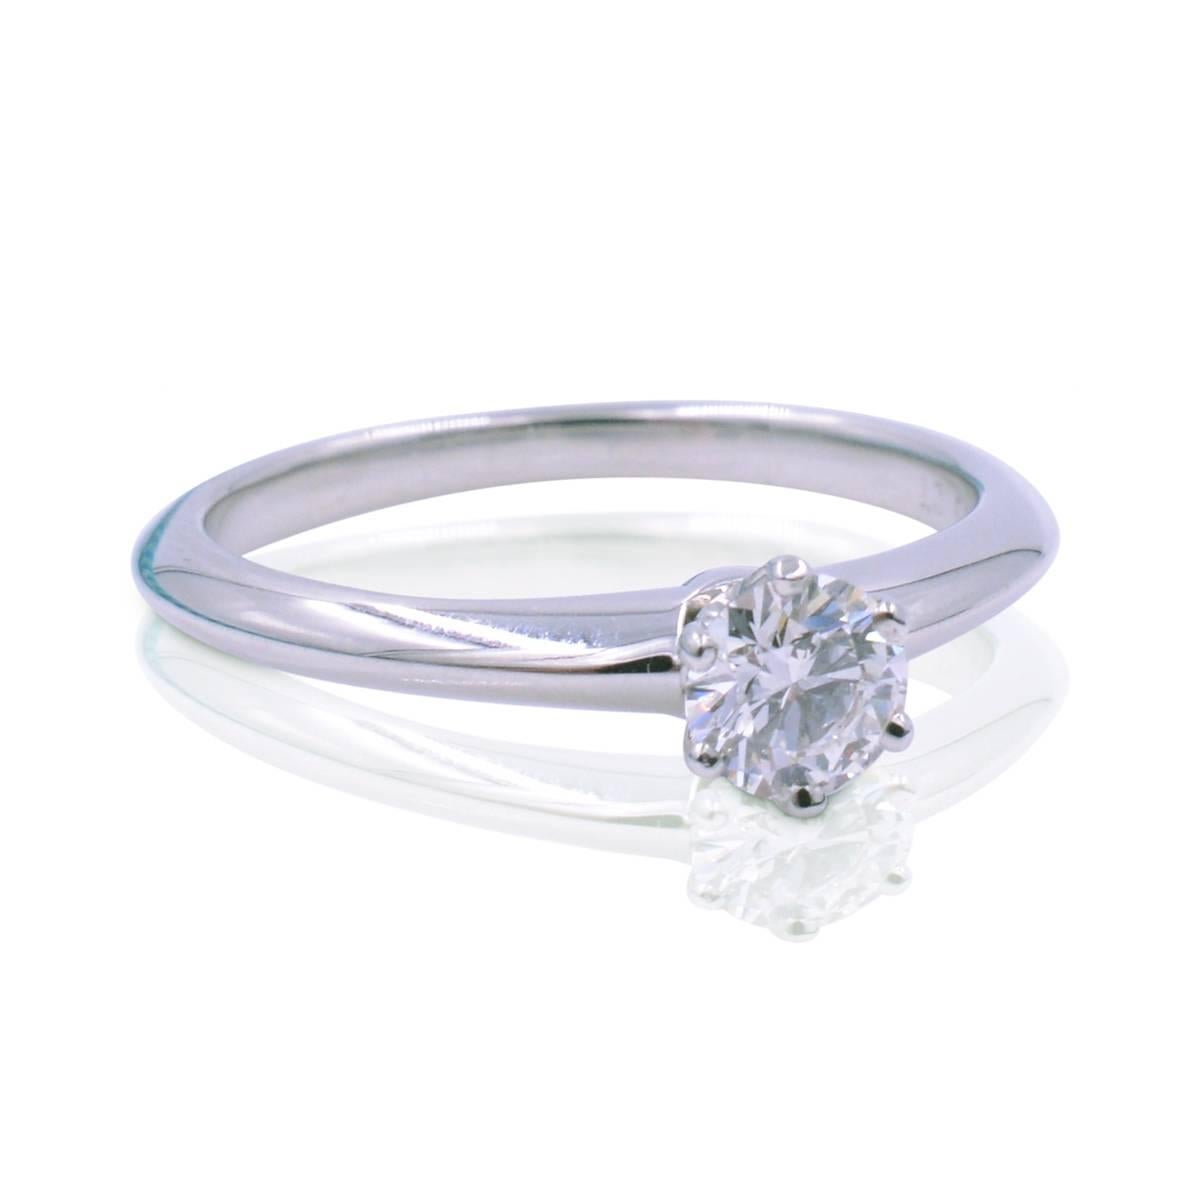 Solitaire six prong diamond engagement ring in Platinum made with round brilliant cut 0.22ct of F color VS2 clarity. Hallmarked Tiffany & Co and is 100% authentic. Ring size 5 and can be adjusted. 